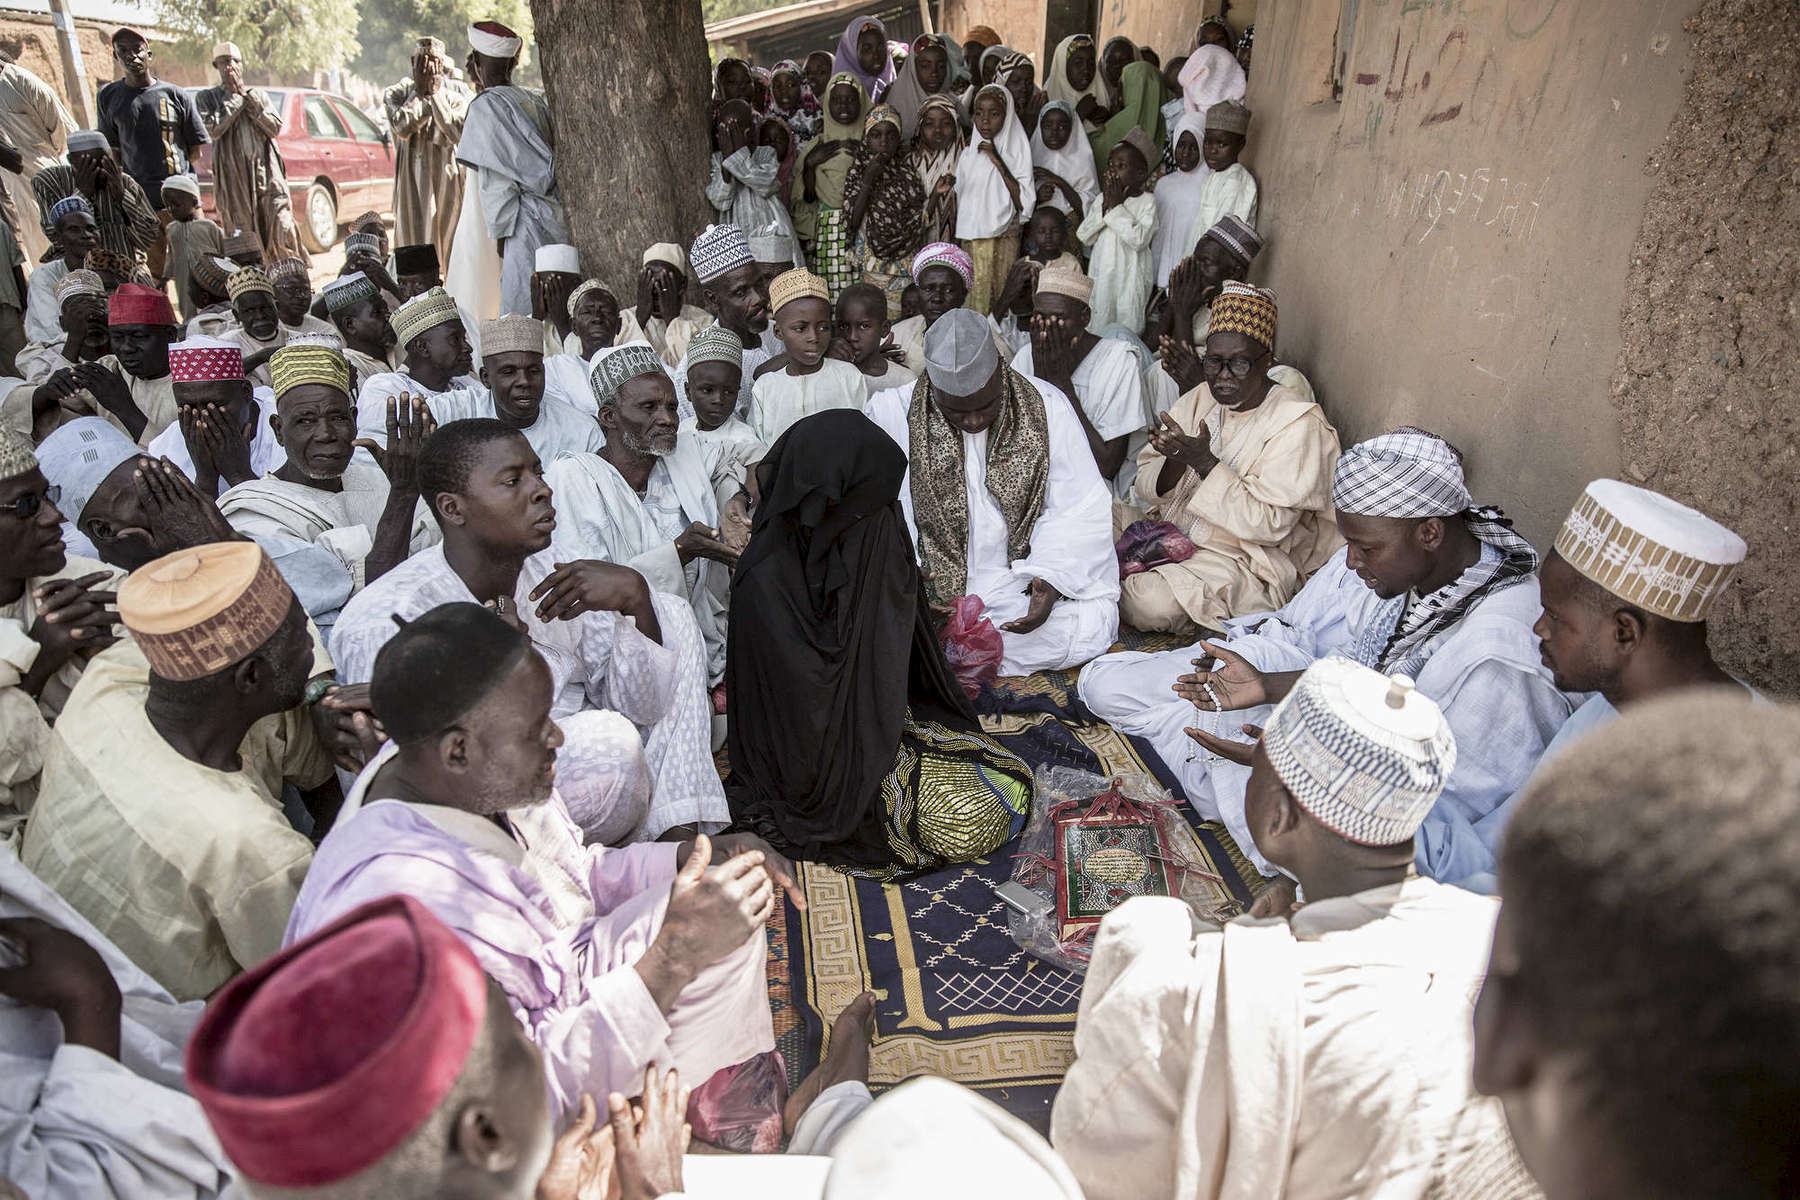 The wedding Fatiah, or ceremony, of Maryan Nazifi, in Dawakin Tofa, another small town outside of Kano, Northern Nigeria. Girls like Maryan rarely interact with men other than their relatives so to sit in front of all of the men of her village and receive their blessings is a moment of contract and prayer. 